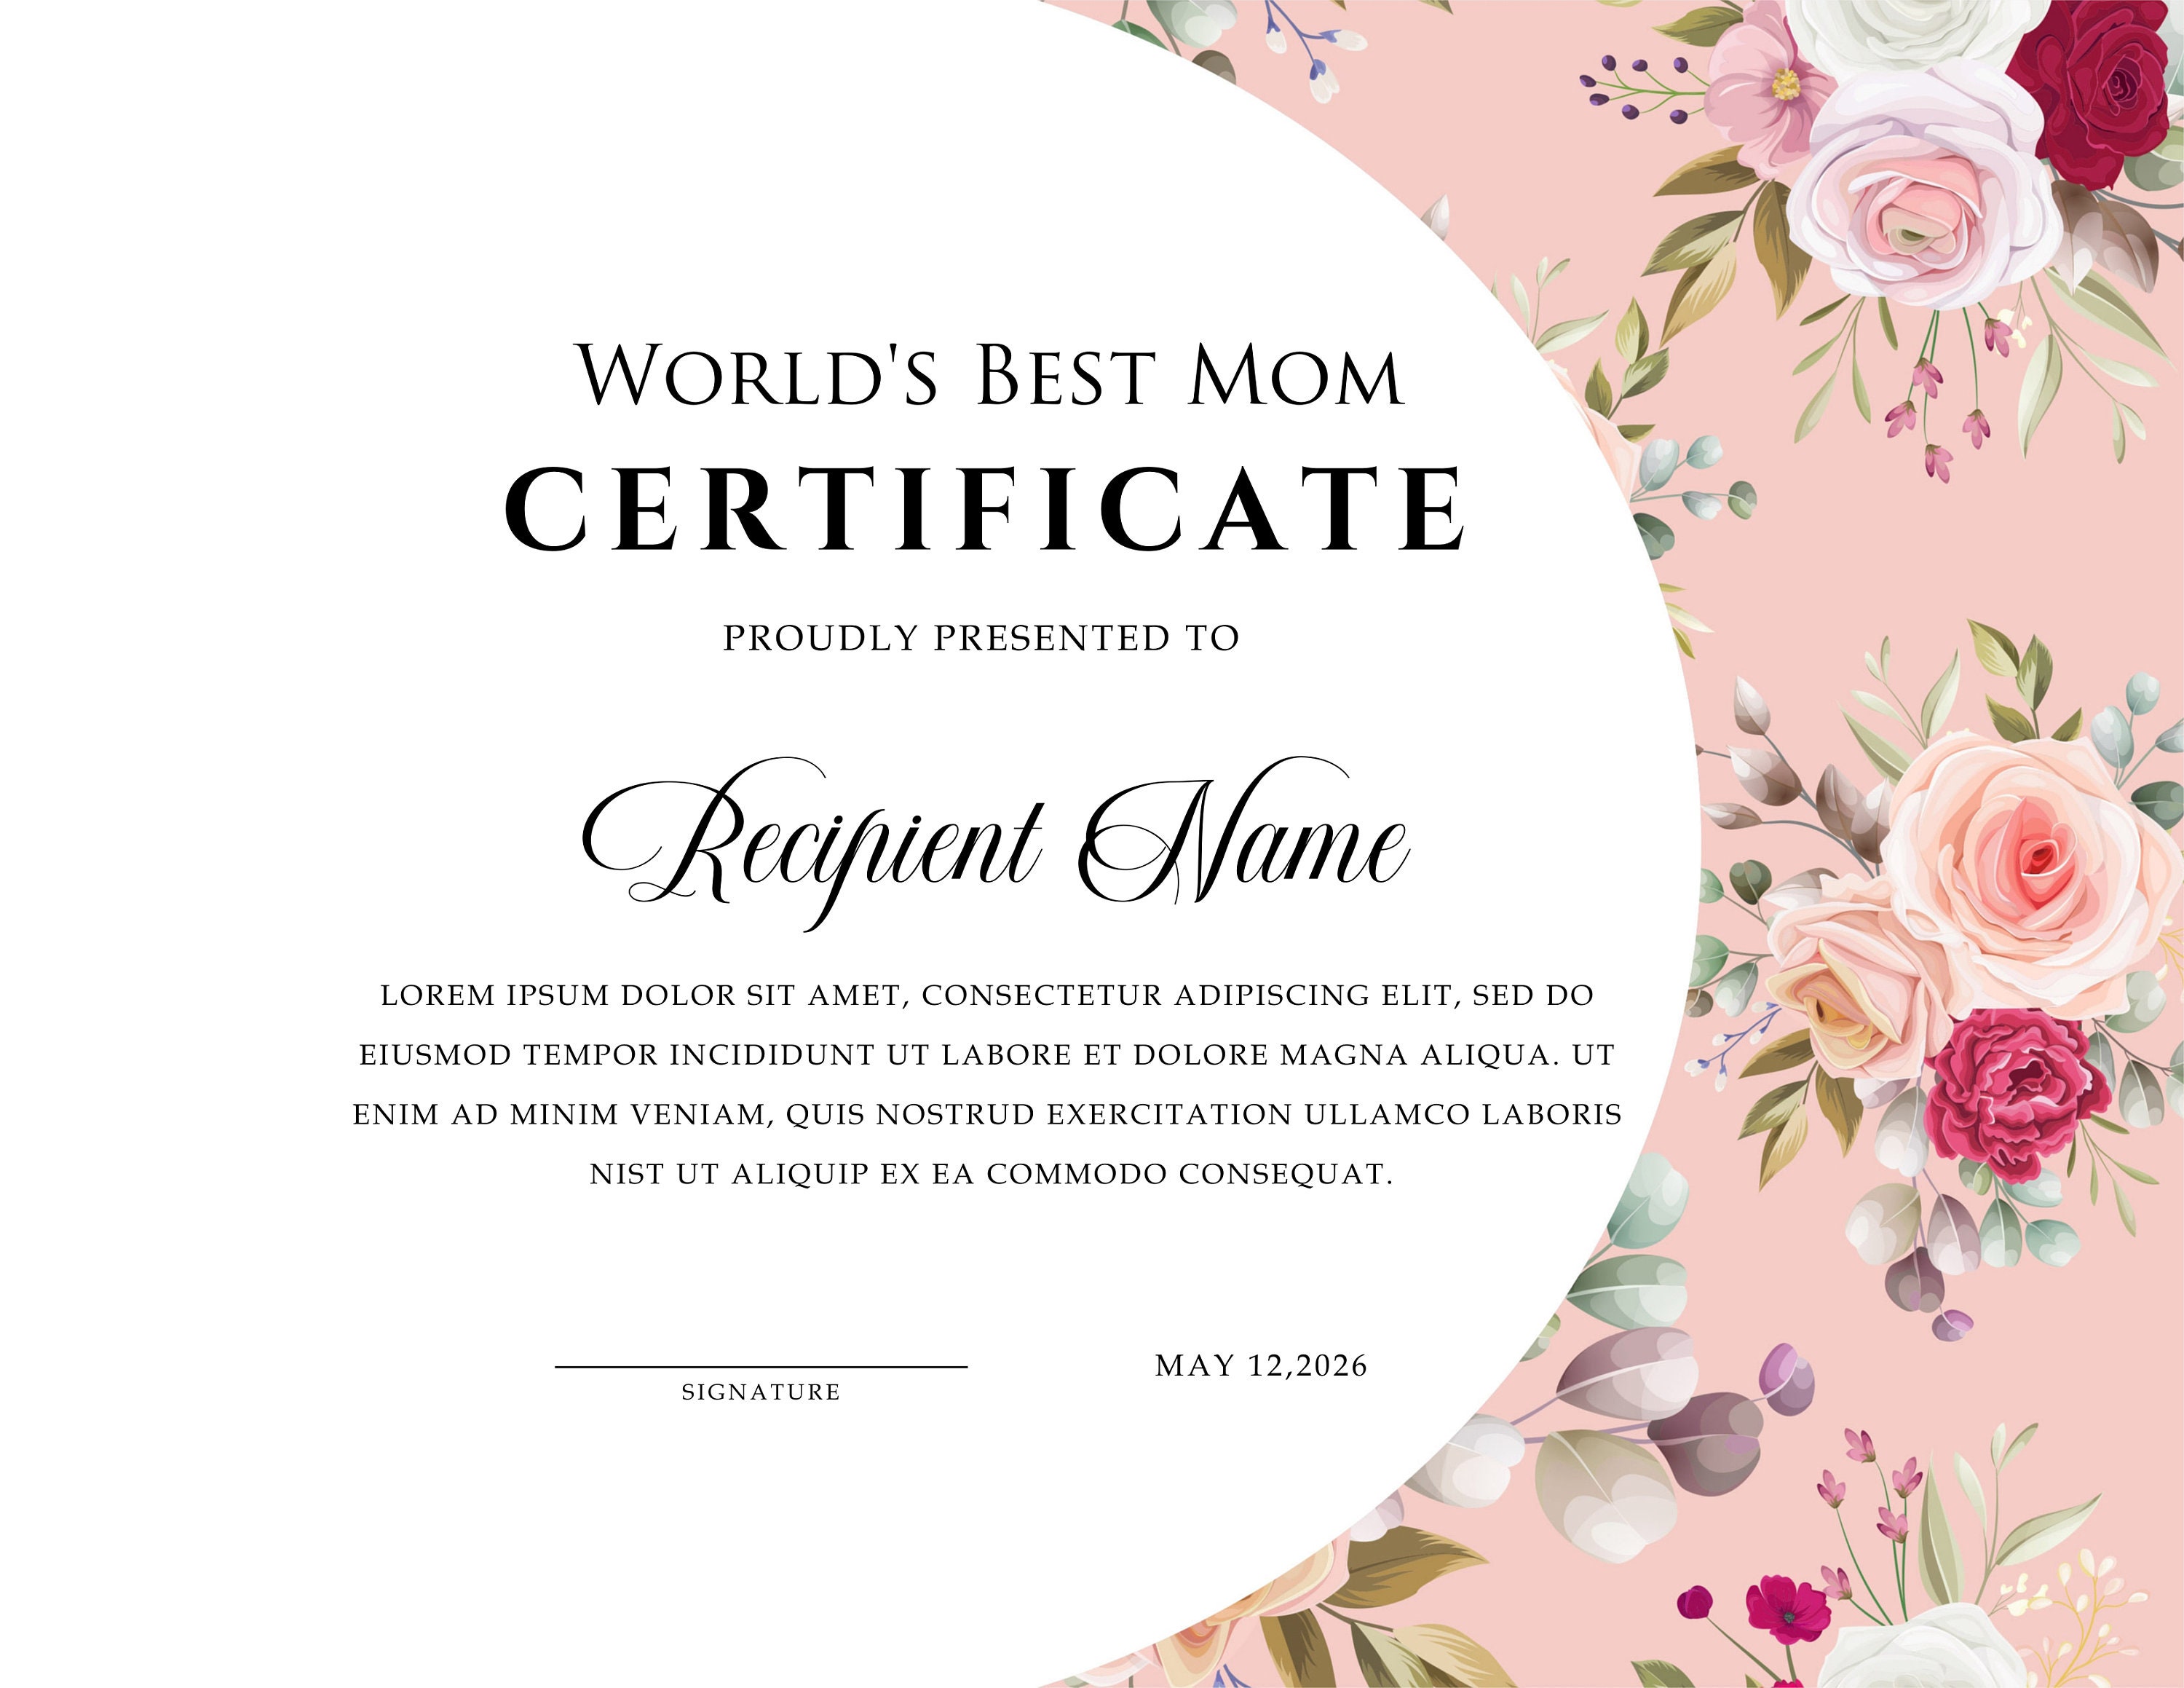 Nist Collage Sex Video - Printable Worlds Best Mom Certificate. Certificate for Mom. - Etsy